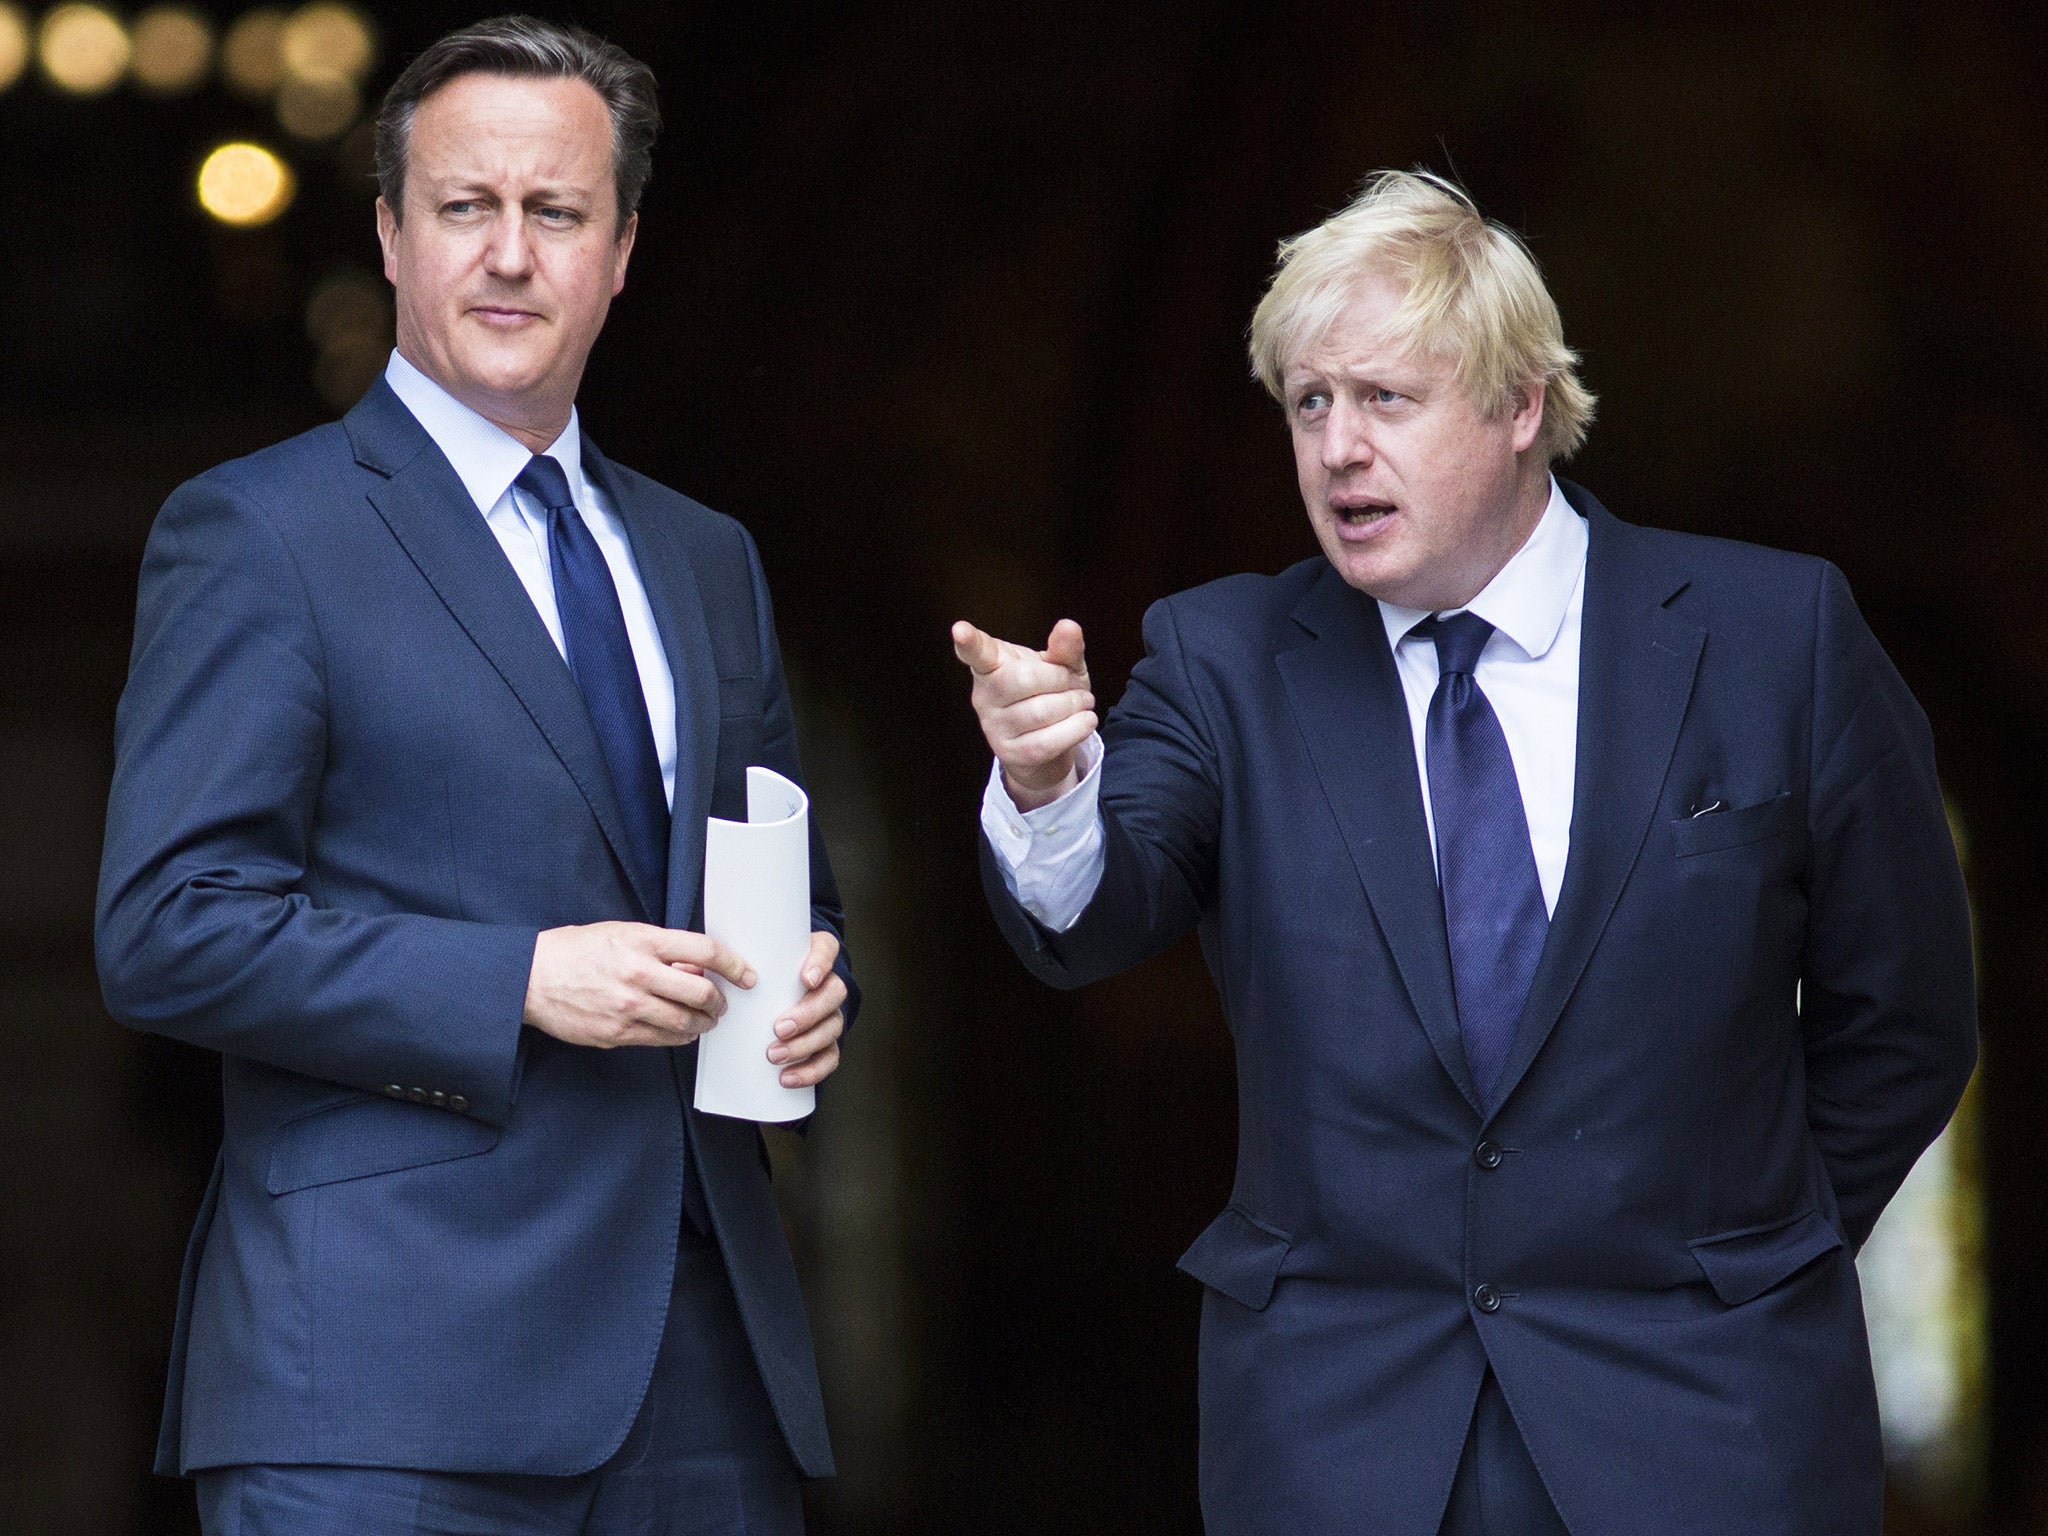 Over 40 per cent of Tory voters would like to see Boris Johnson takeover from David Cameron